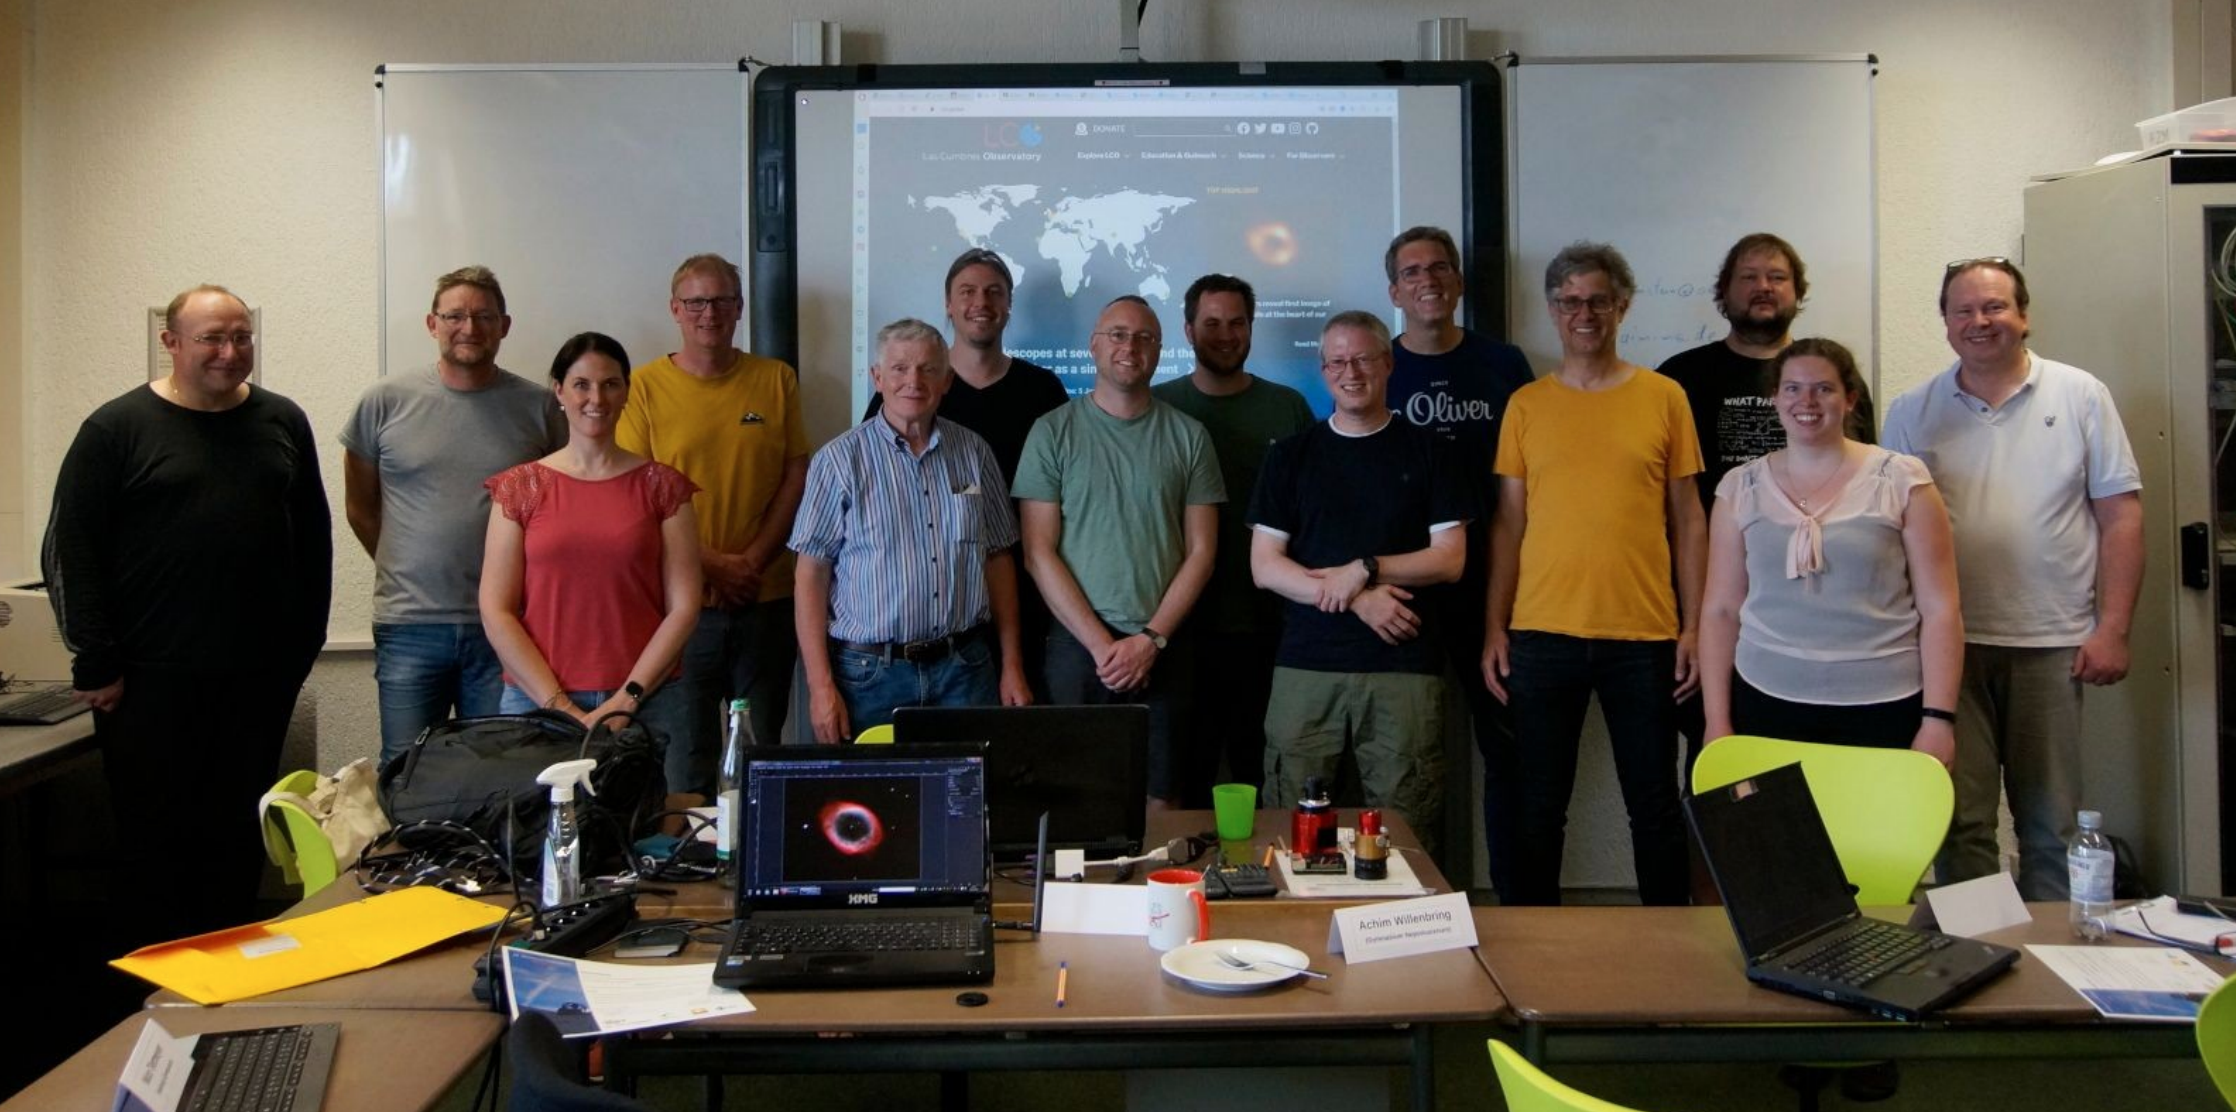 Participants of the “Astronomy 2.0” teacher training event in Coesfeld, Germany